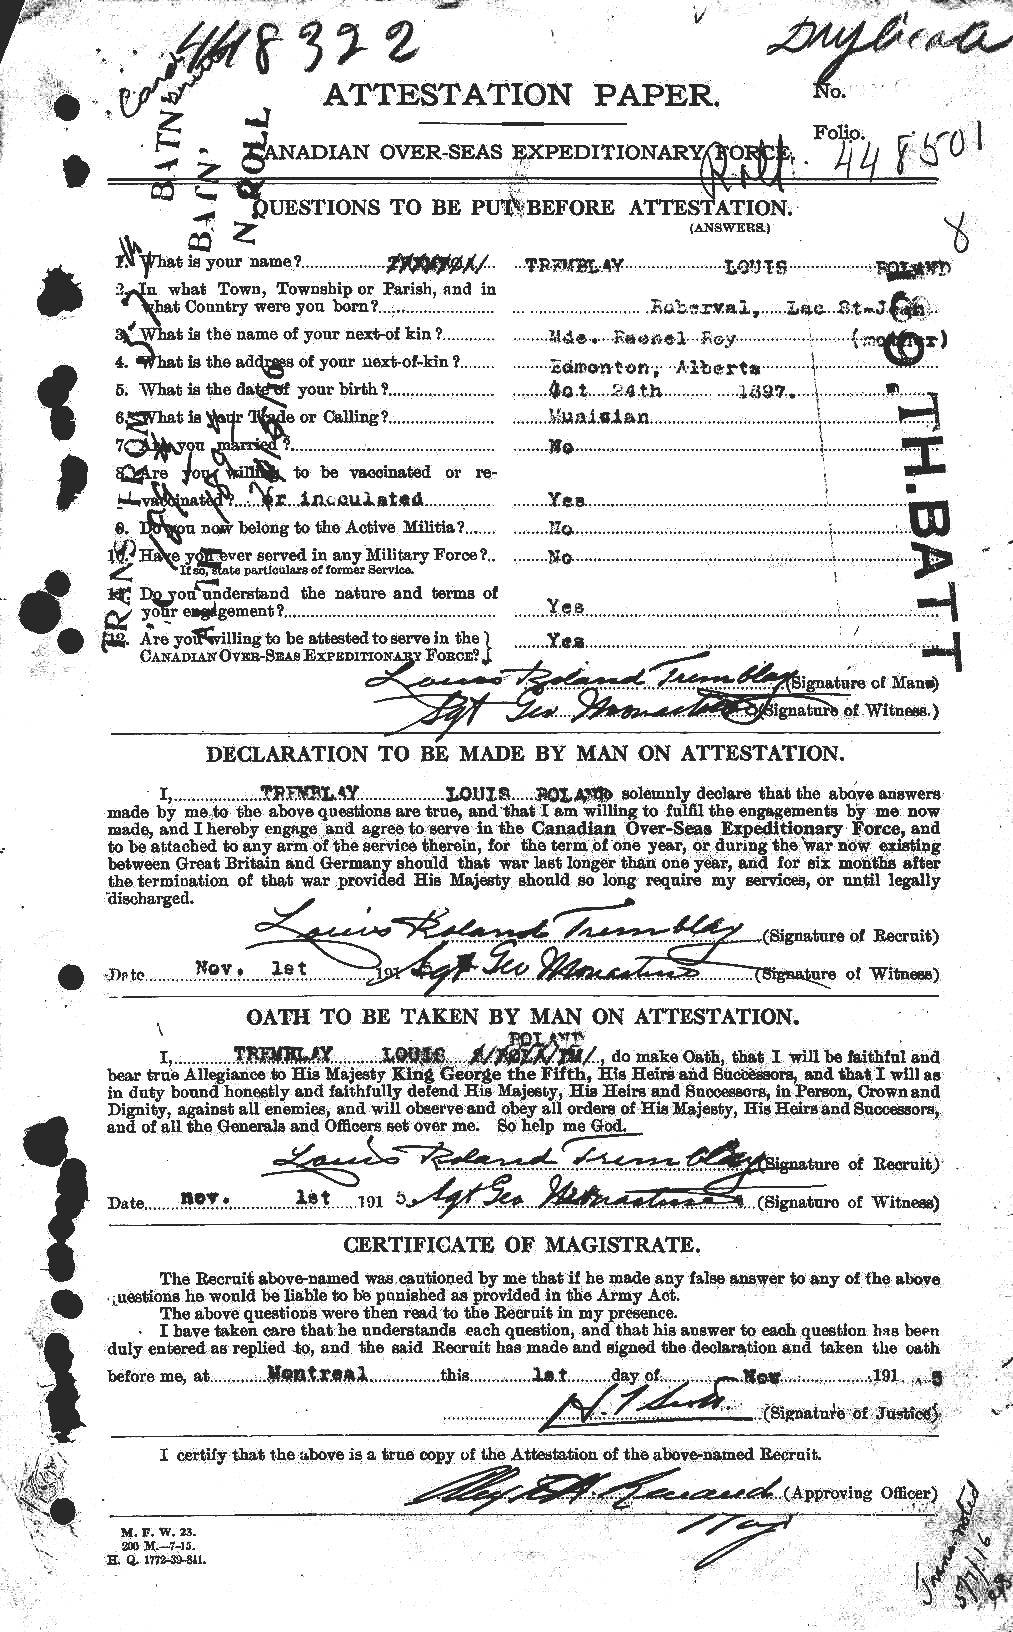 Personnel Records of the First World War - CEF 639194a